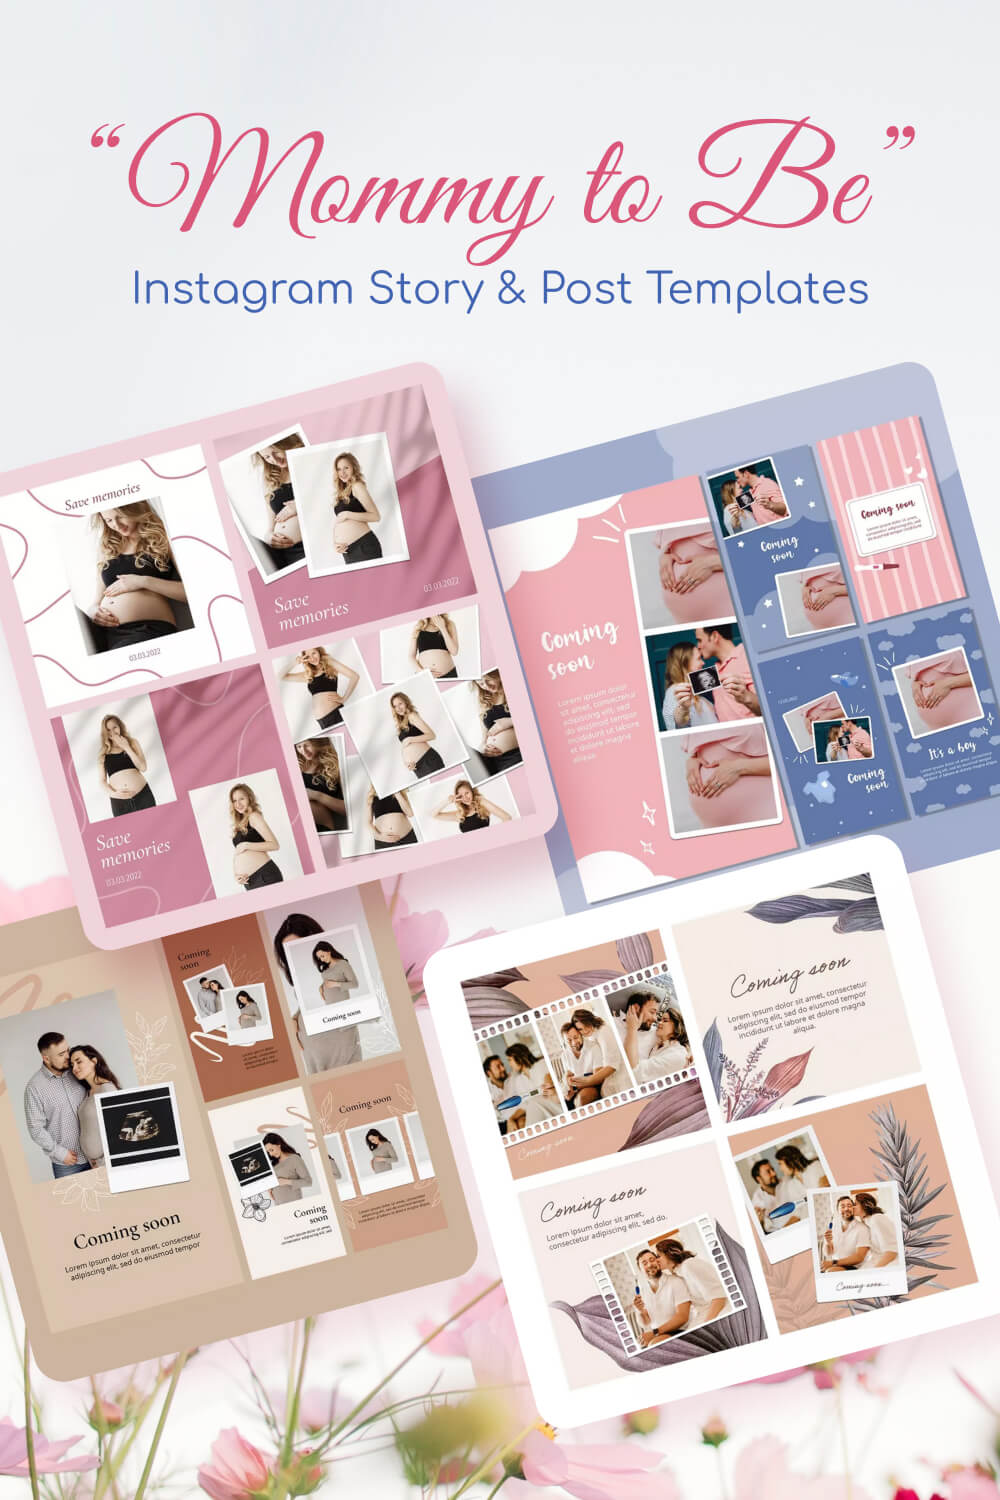 mommy to be instagram story post templates pinterest image.